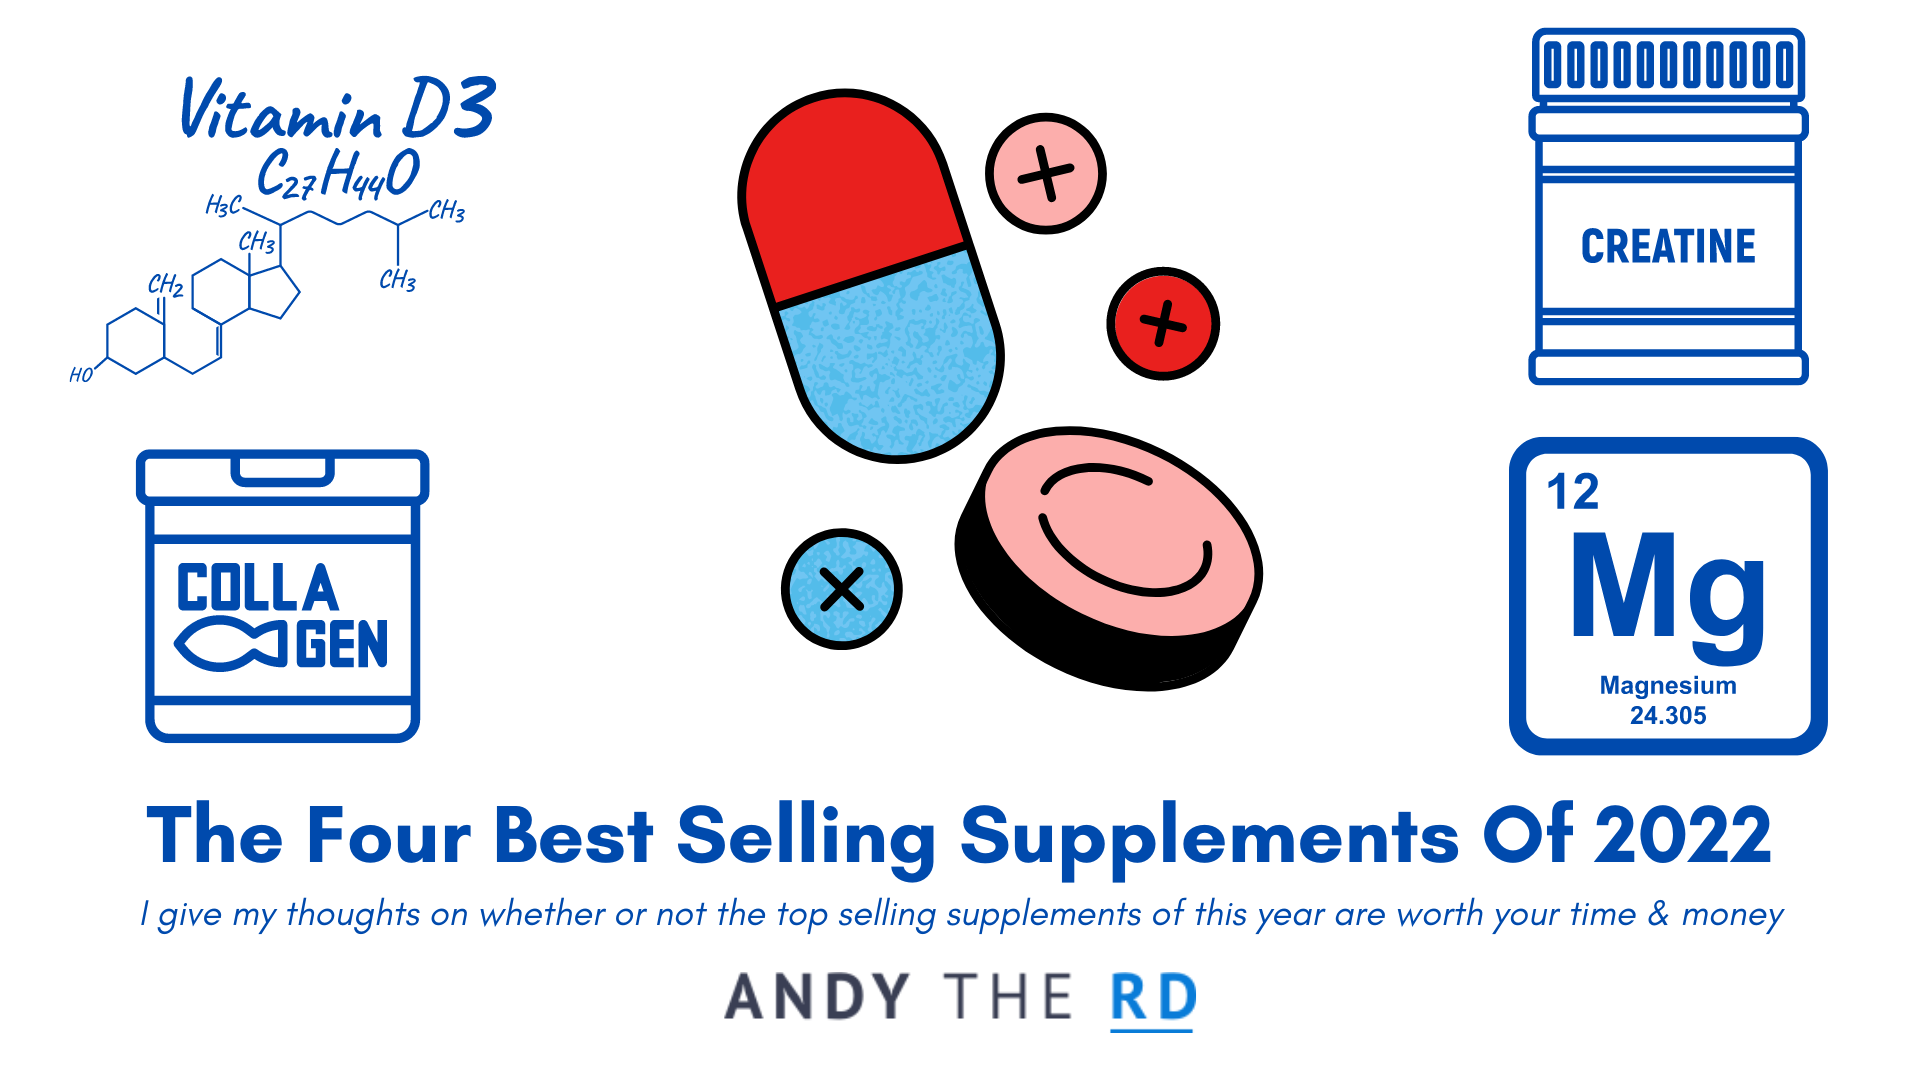 The Four Best Selling Supplements on Amazon.ca